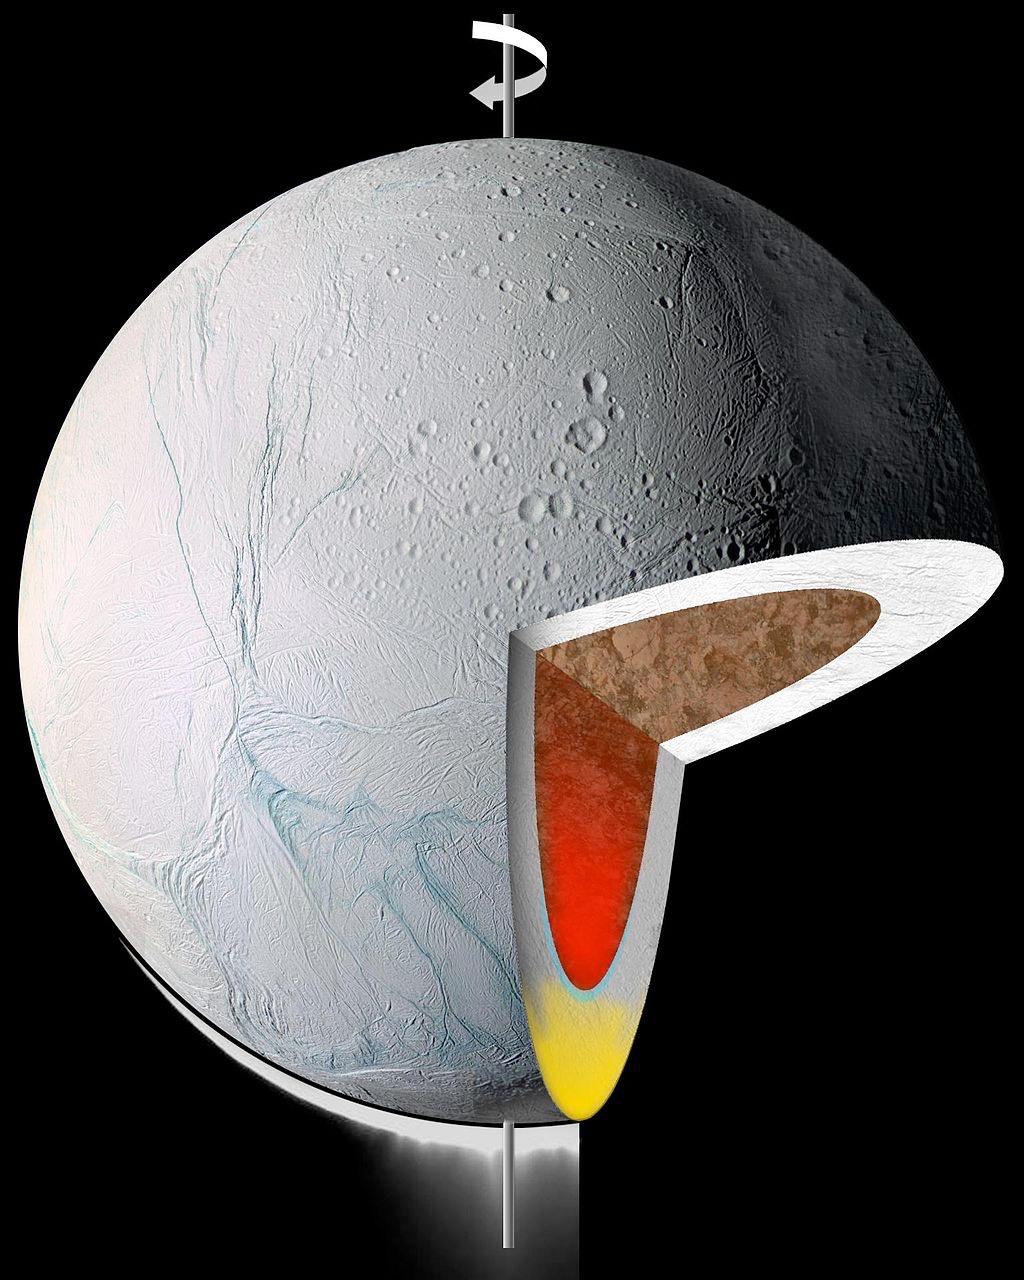 Enceladus: Internal Structure 11 Voyager data indicated body was mostly ice, but Cassini showed higher density that implies more silicate.